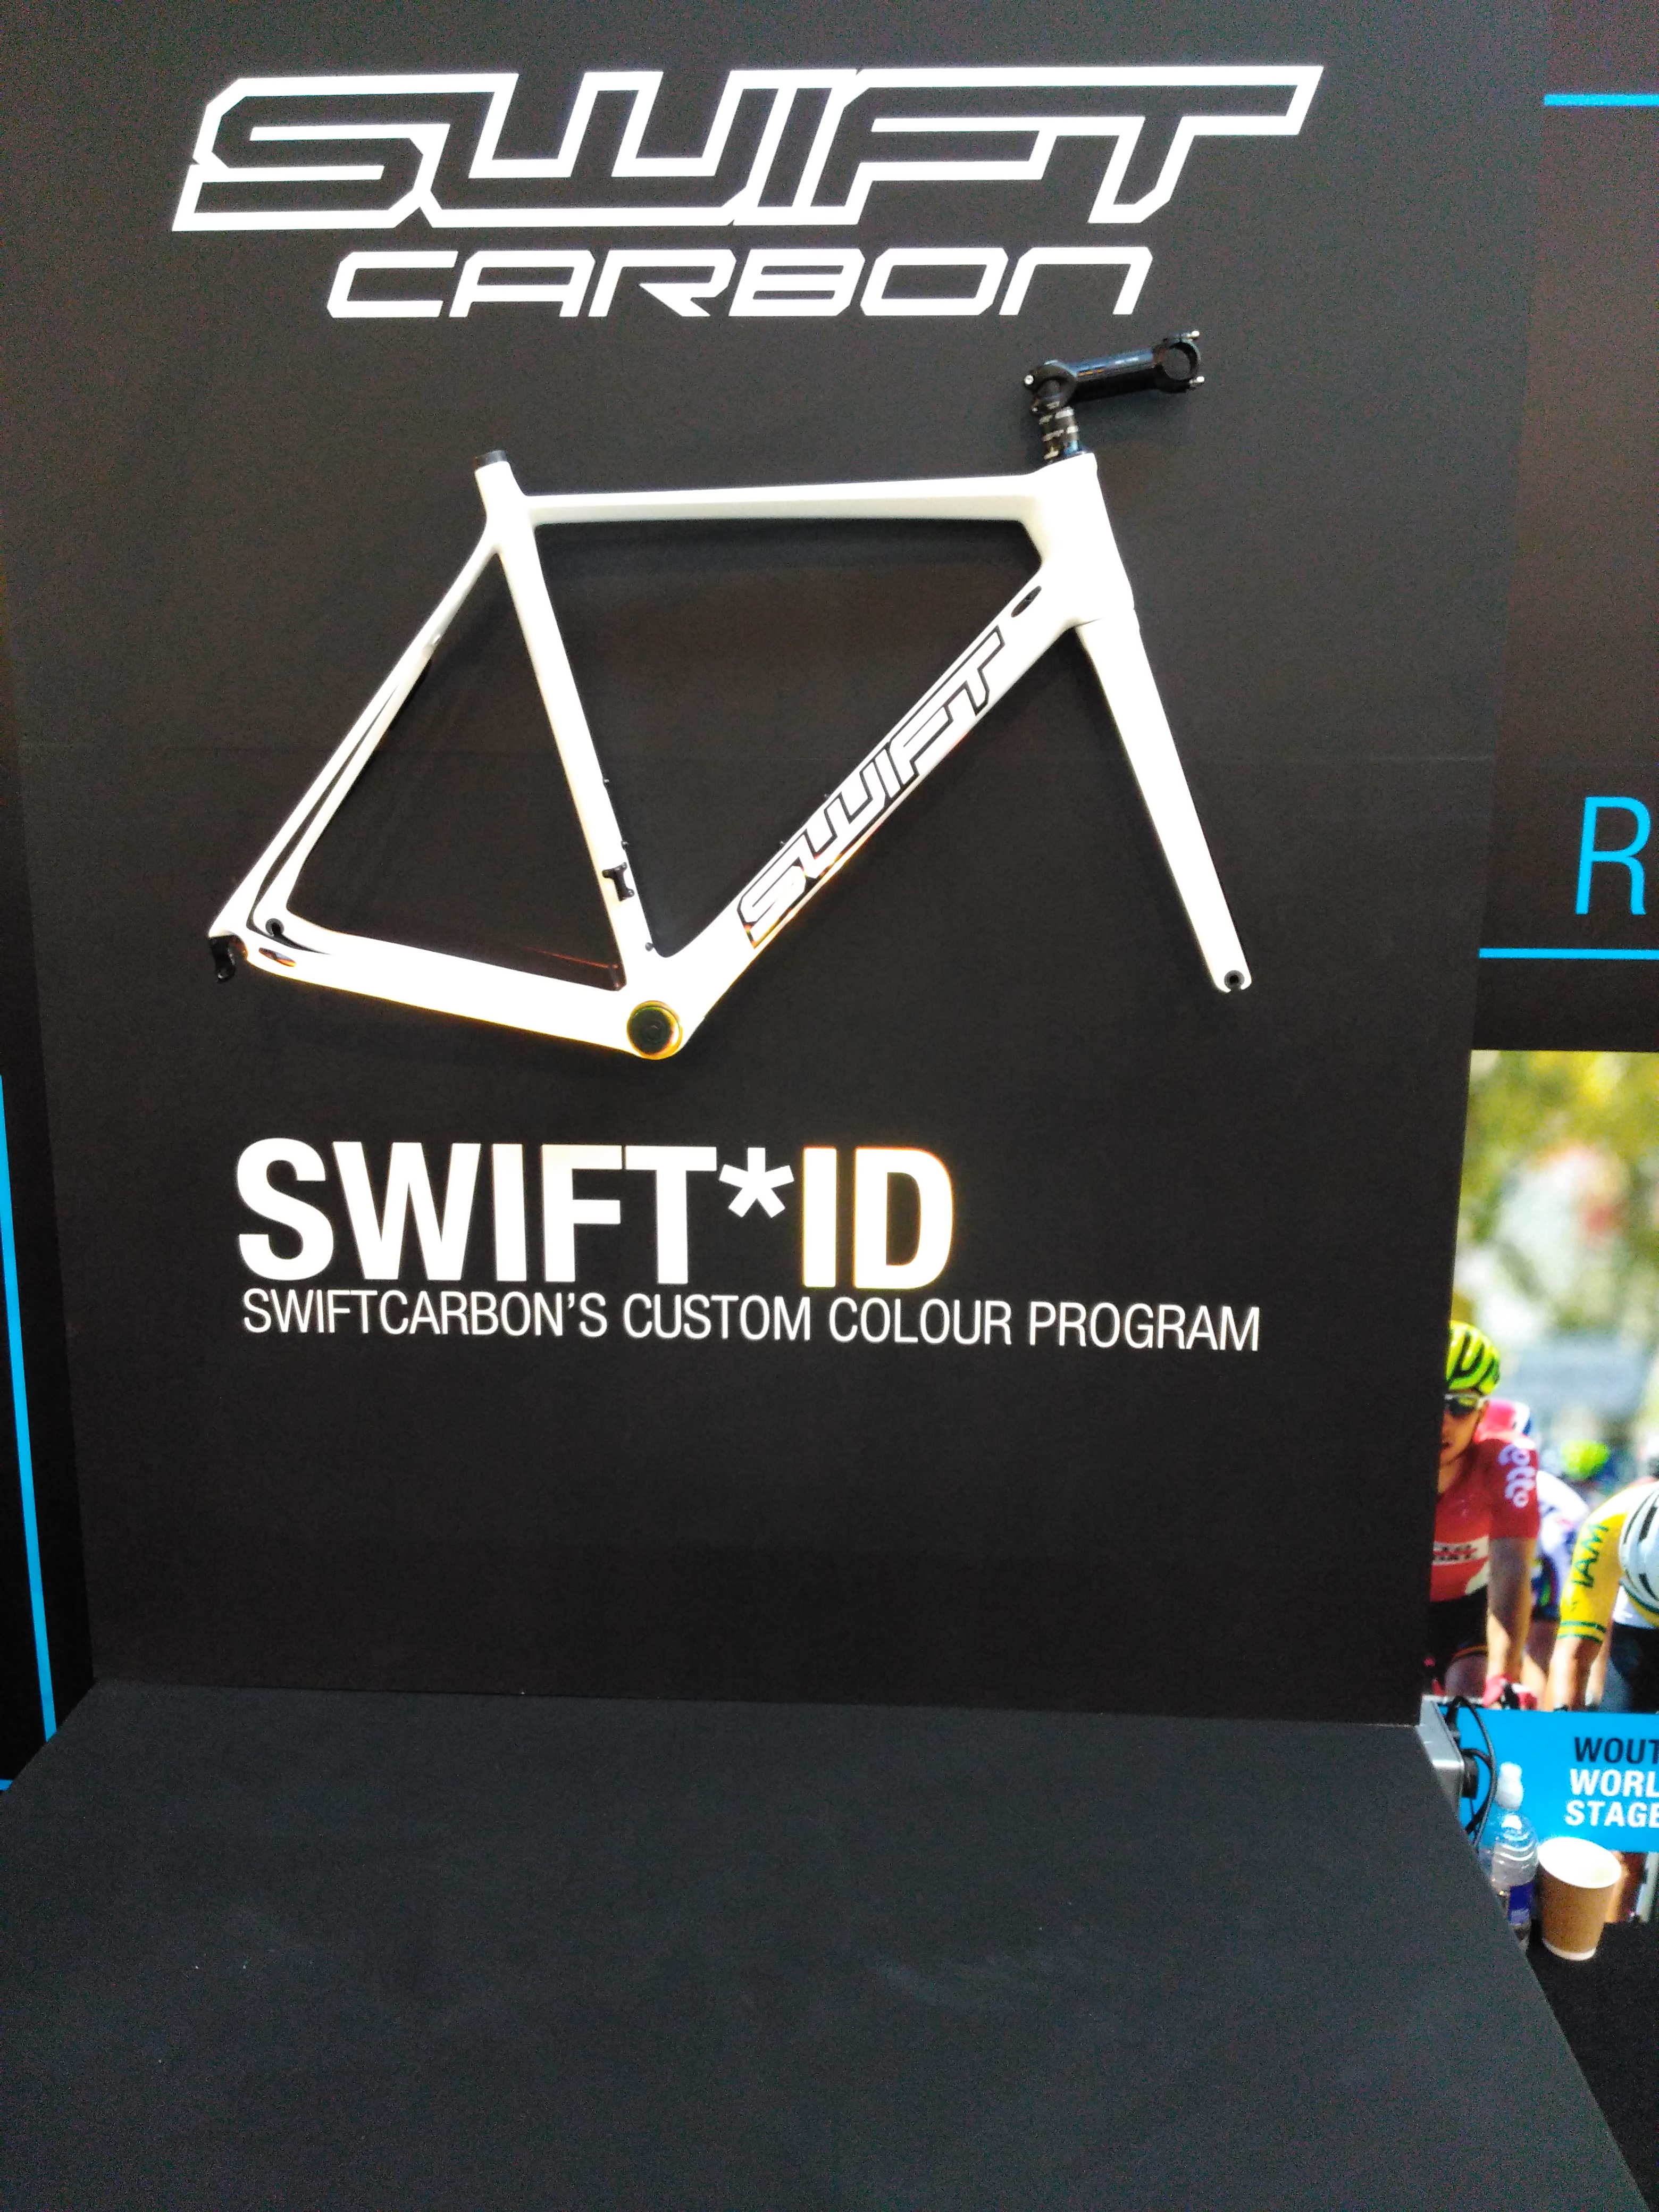 Design your own brand of bike with Swift *ID